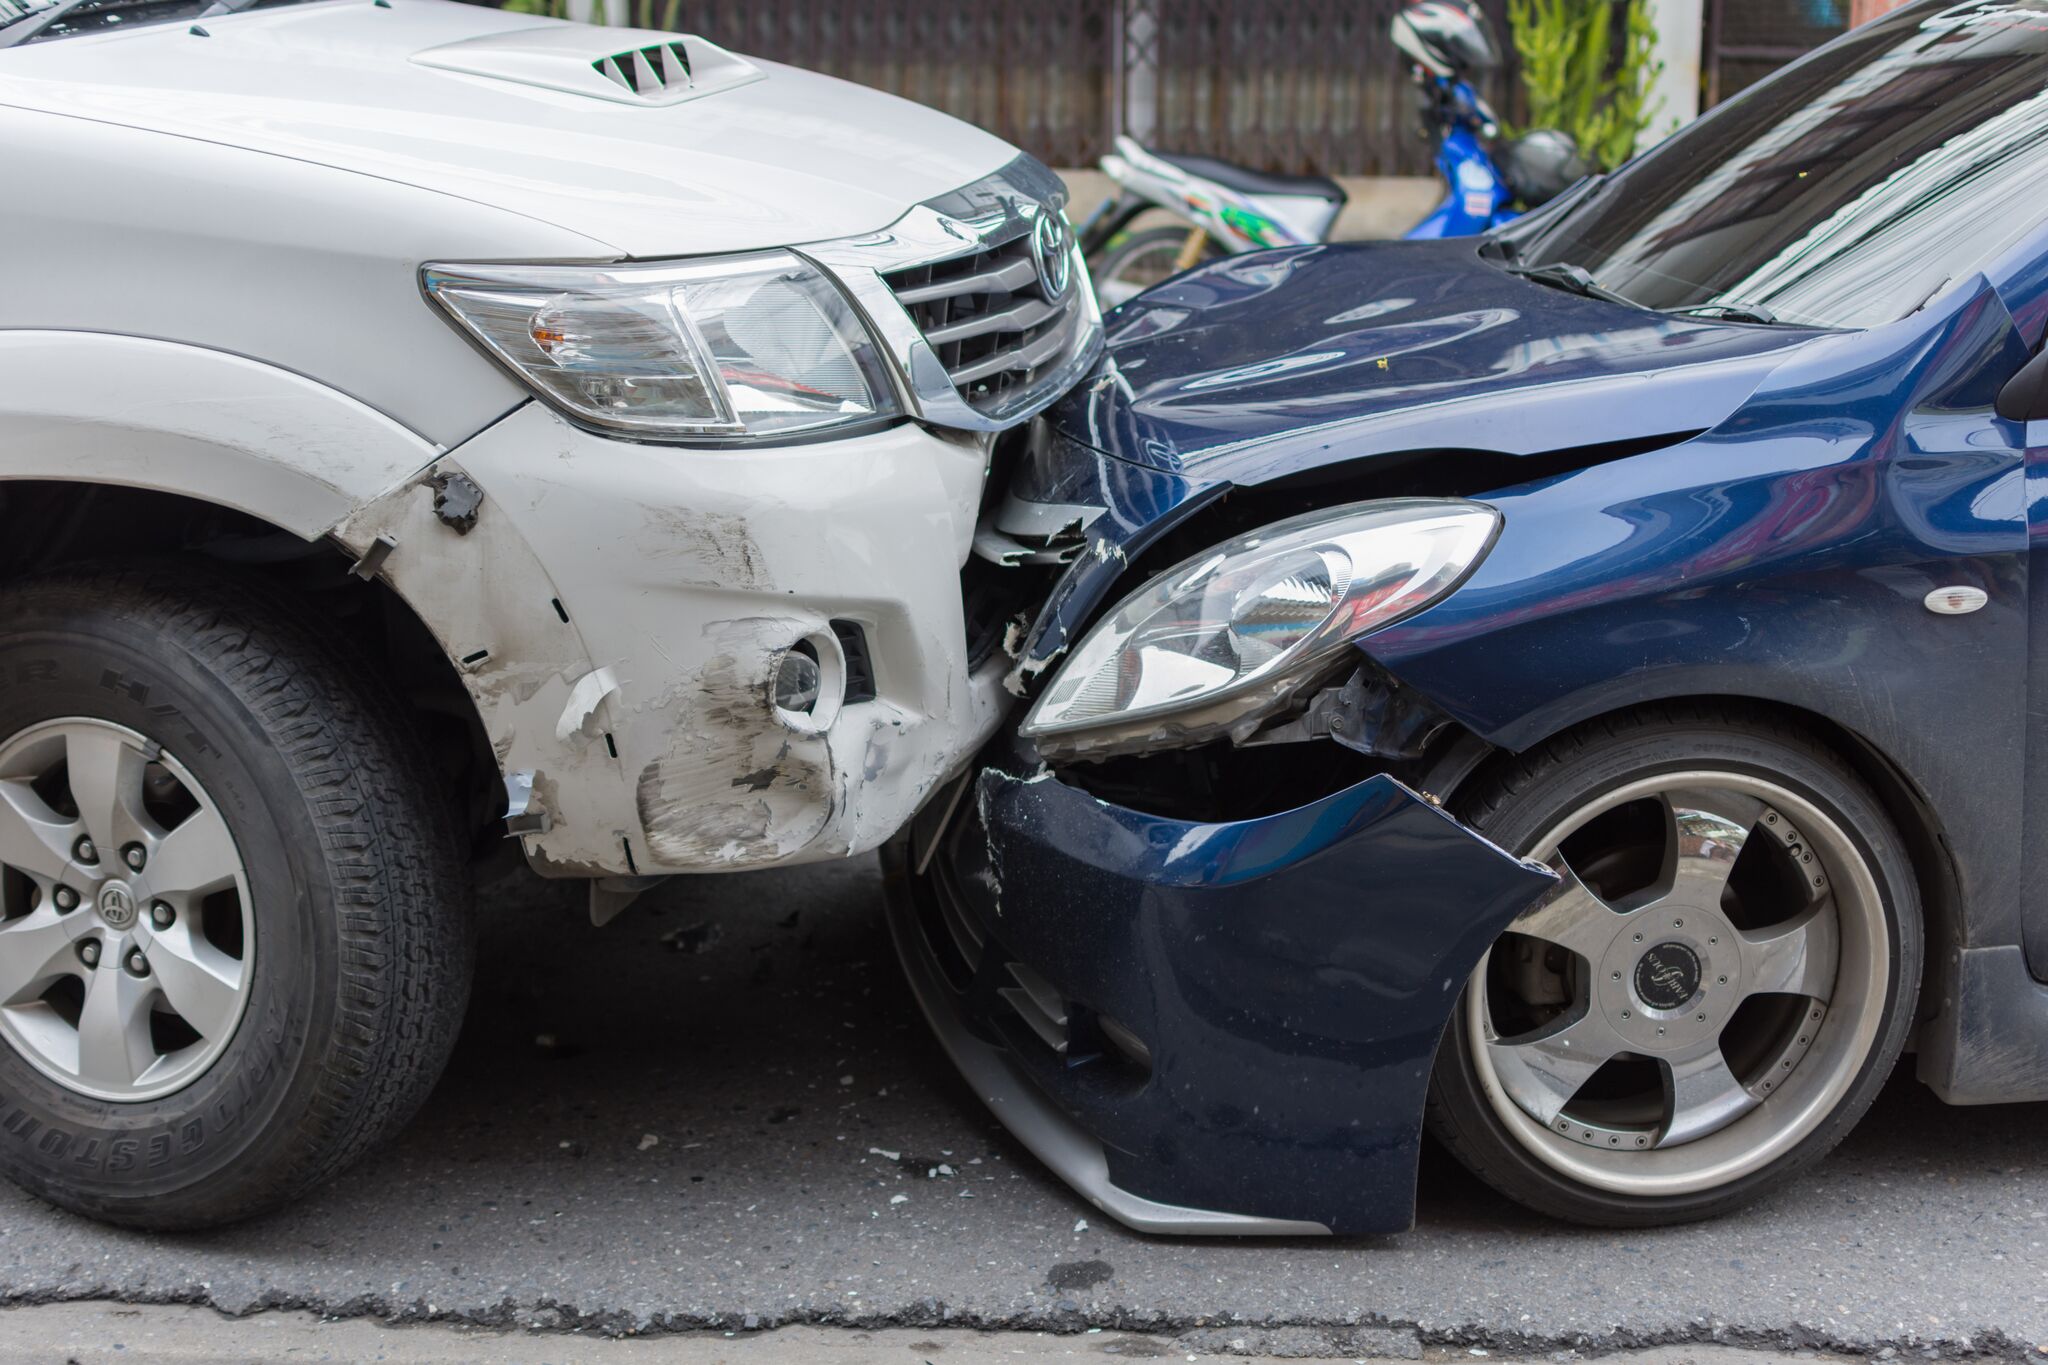 How Does Speeding Contribute to Car Accidents?